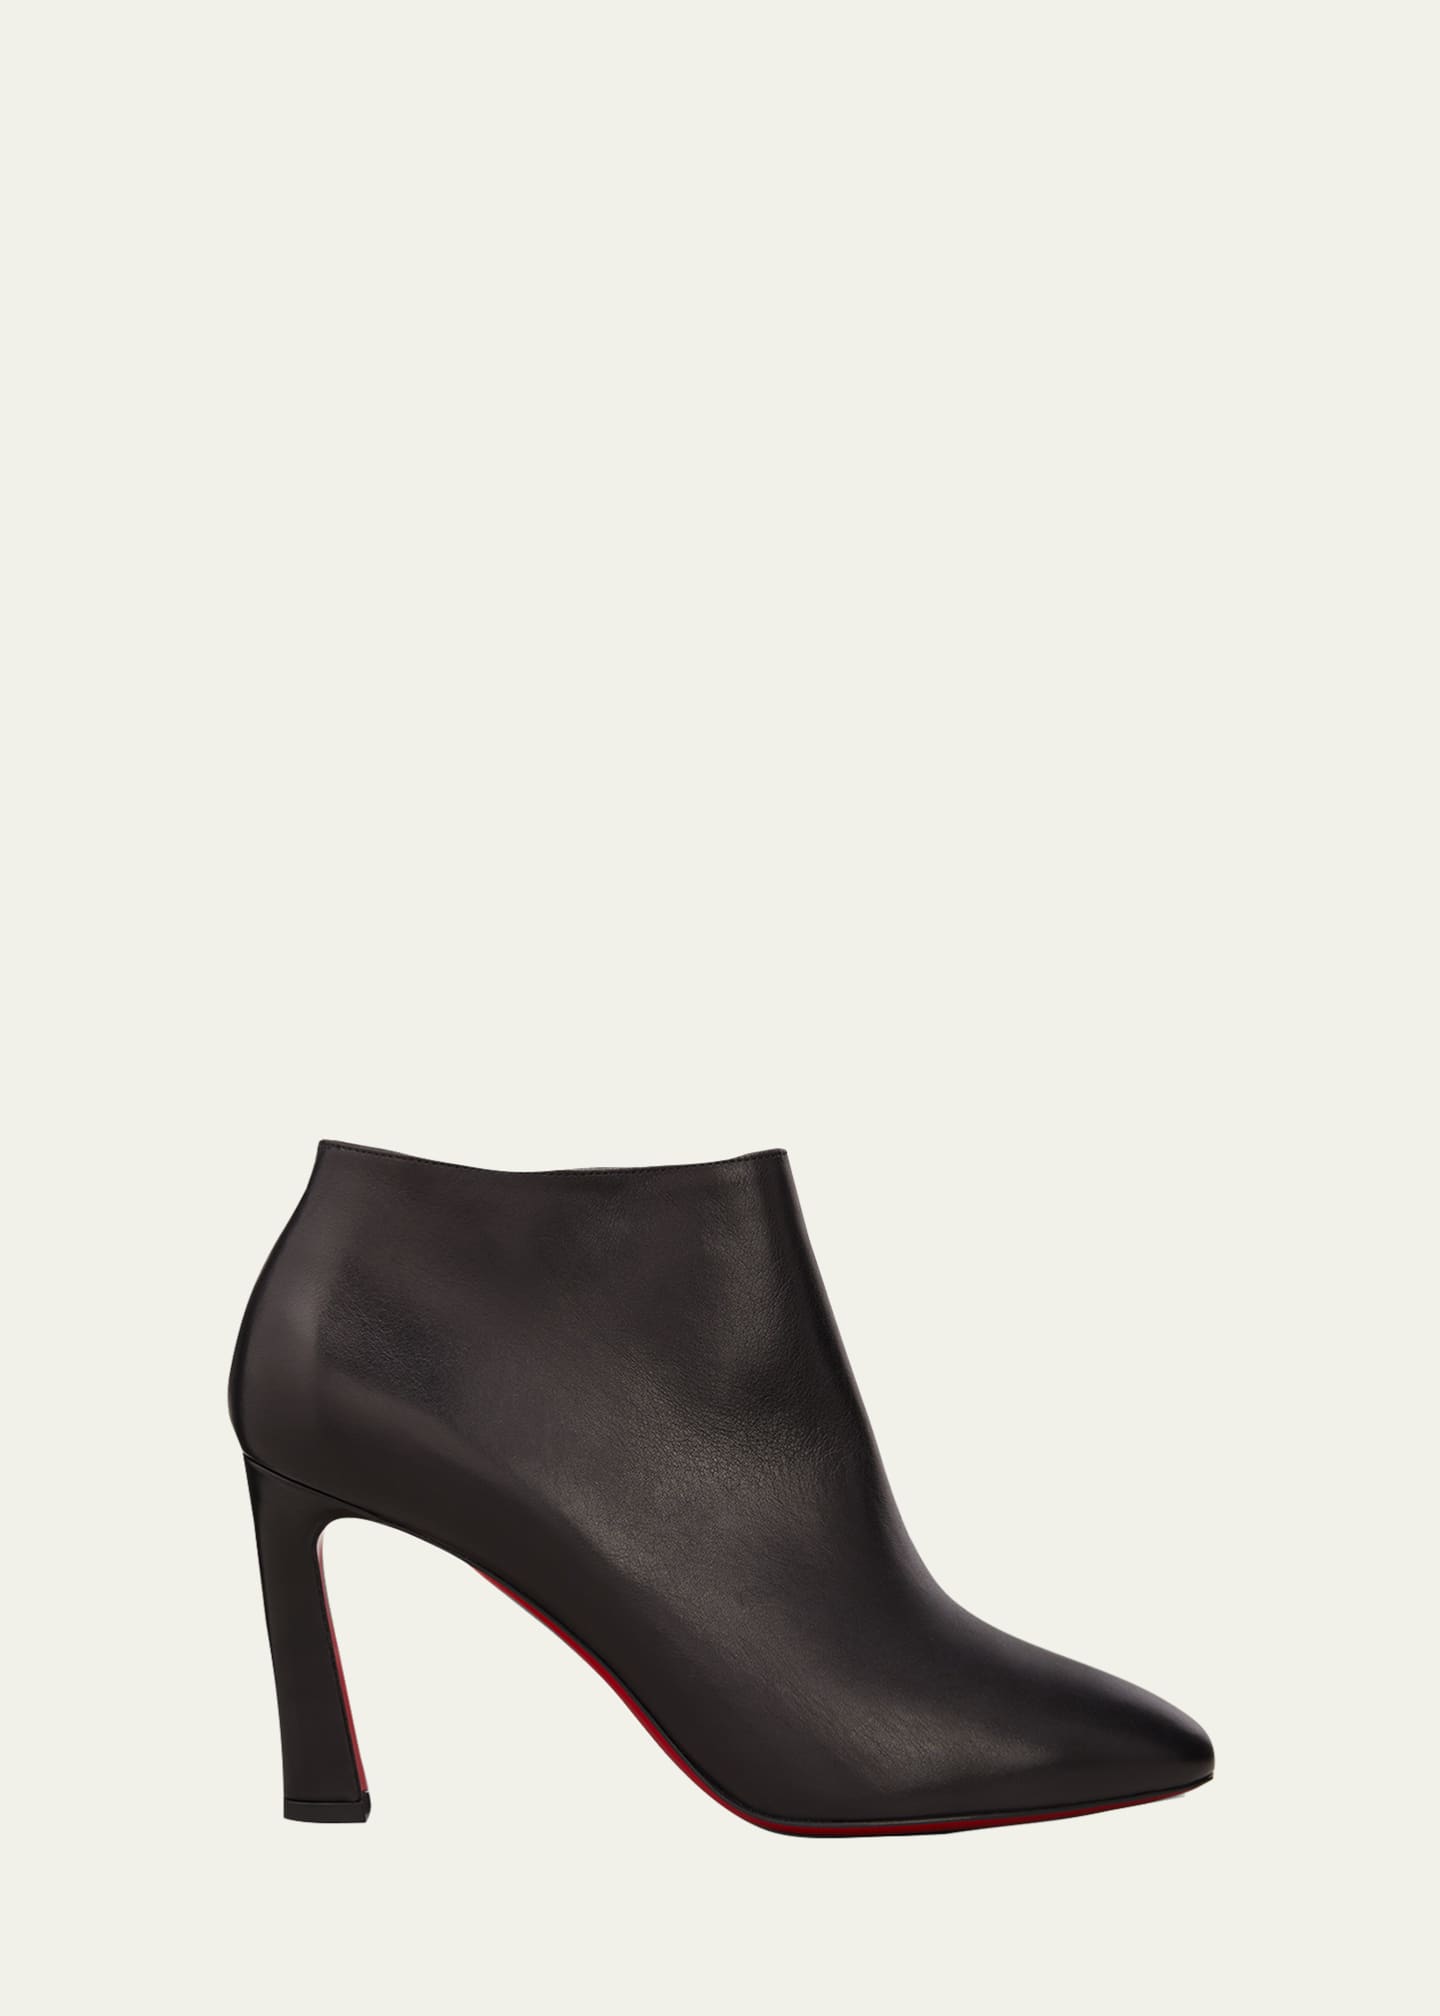 Christian Louboutin Eleonor Red Sole Ankle Booties - Bergdorf Goodman